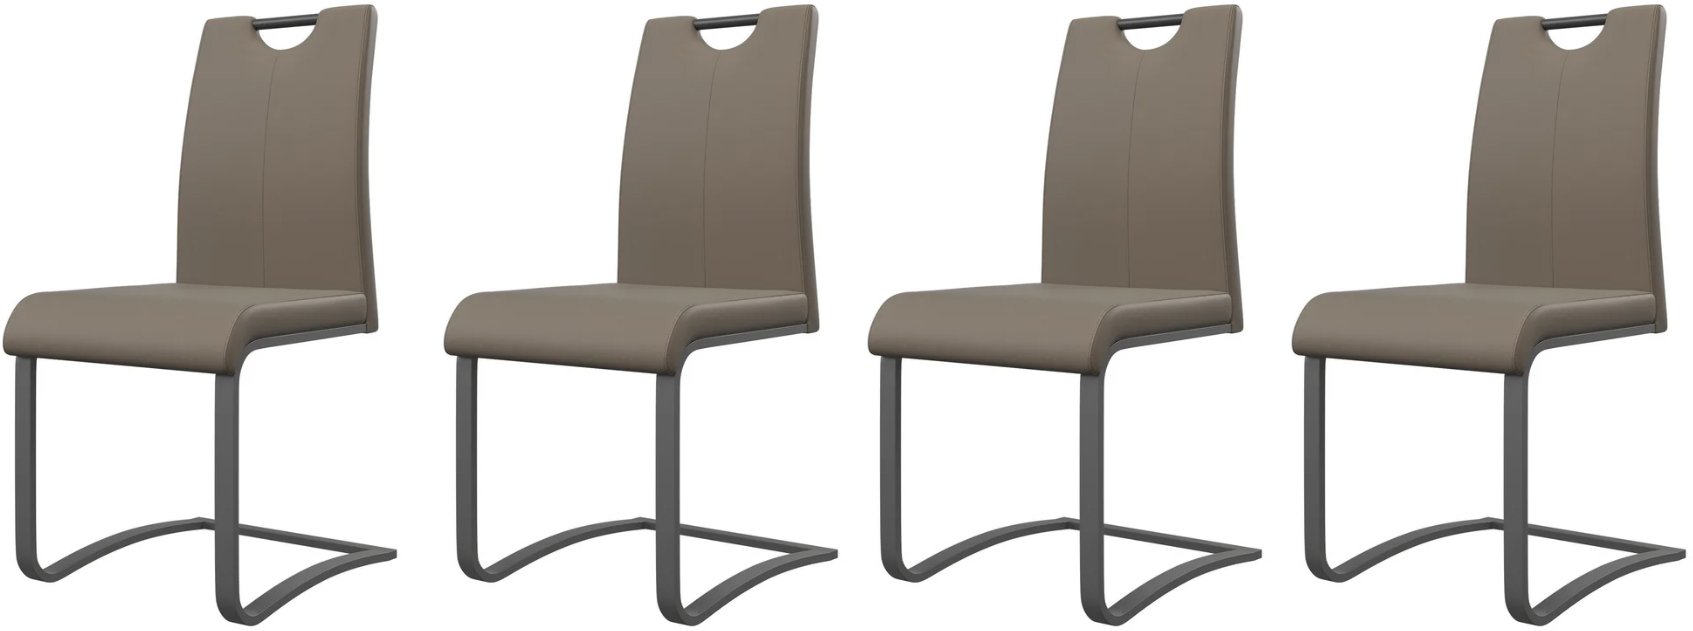 Set of 4 Torelli Gabi Leather Effect Dining Chairs with Grey Frame in Taupe